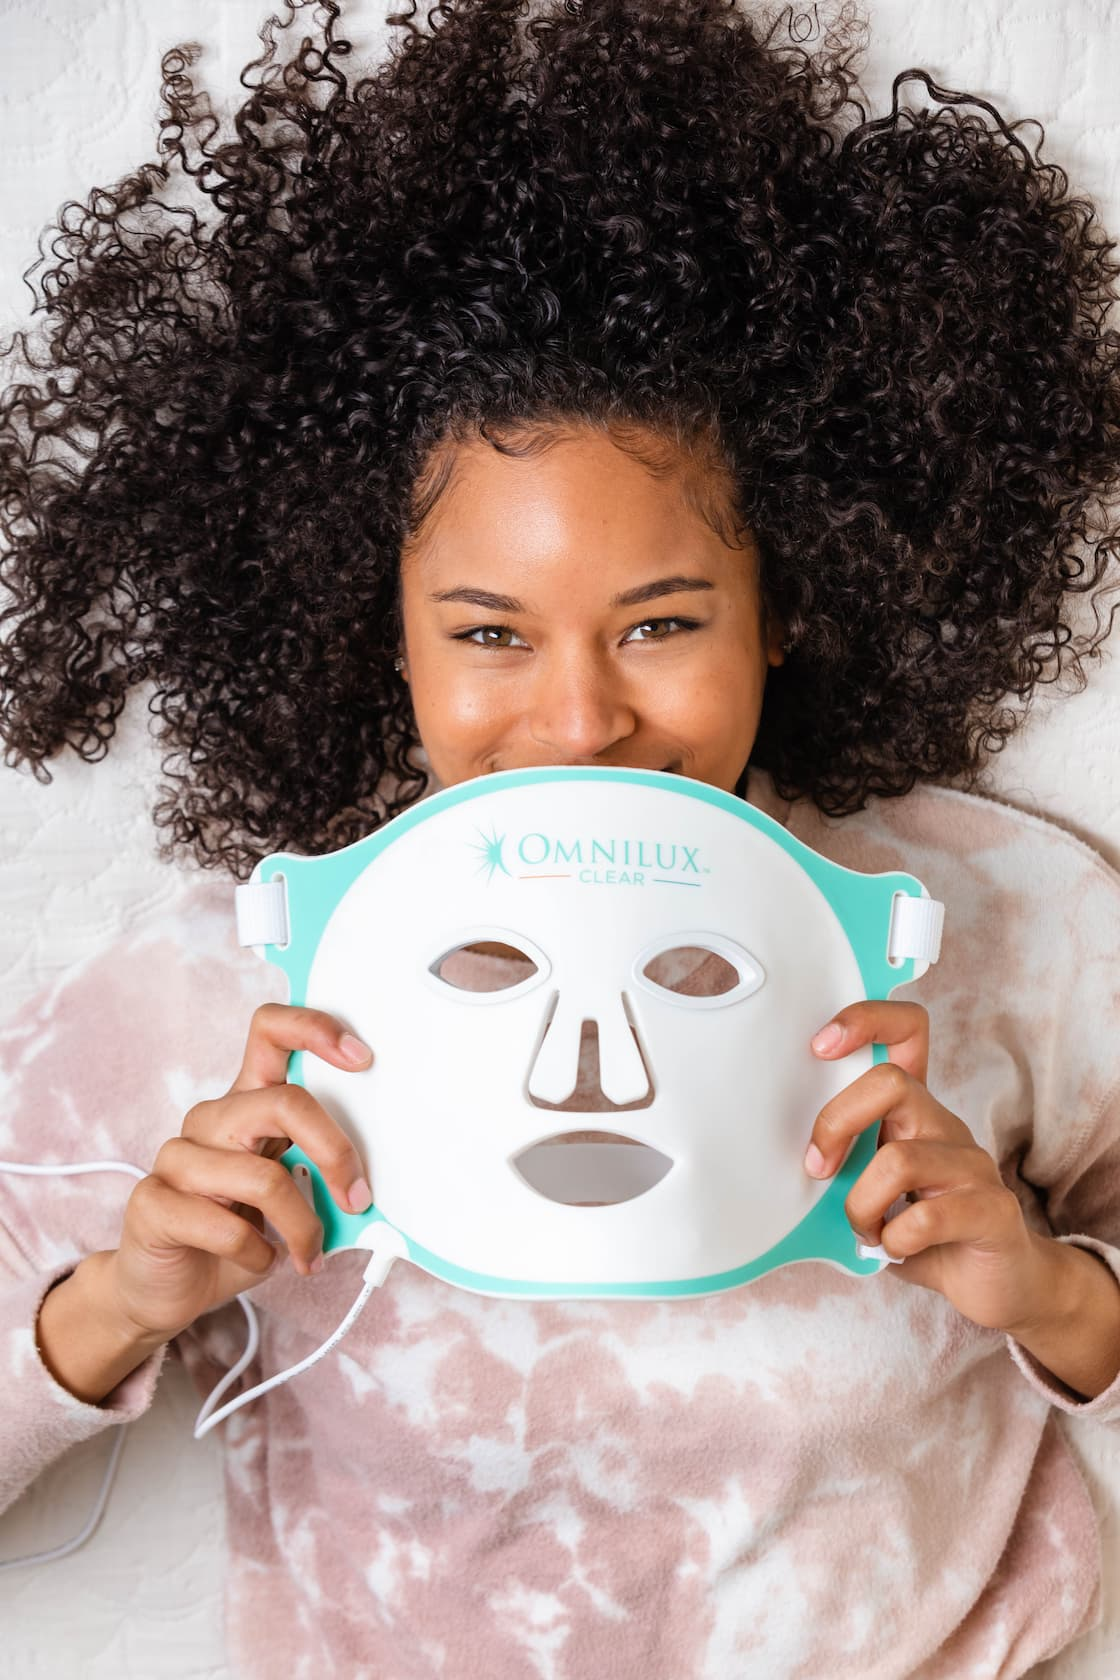 A woman using Omnilux Contour Face light therapy to maximize her experience